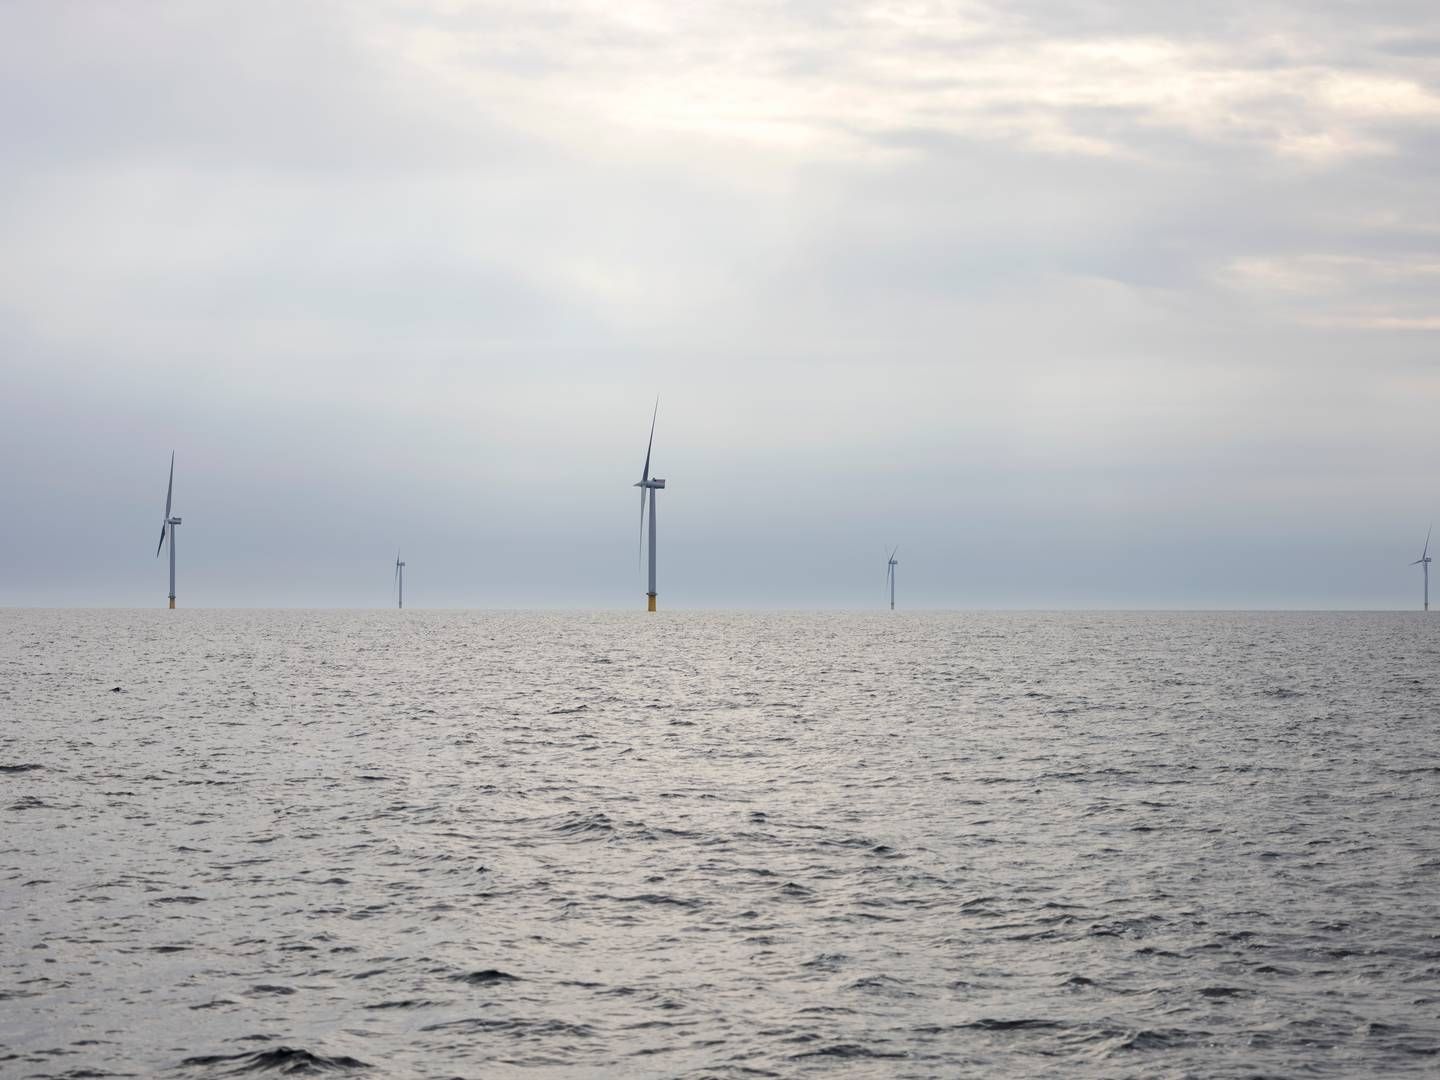 The region has the potential for up to 500GW of offshore wind, but development is challenged by lower wind speeds of around 7.4 meters per second and less stable seabed conditions. | Photo: Marcus Emil Christensen